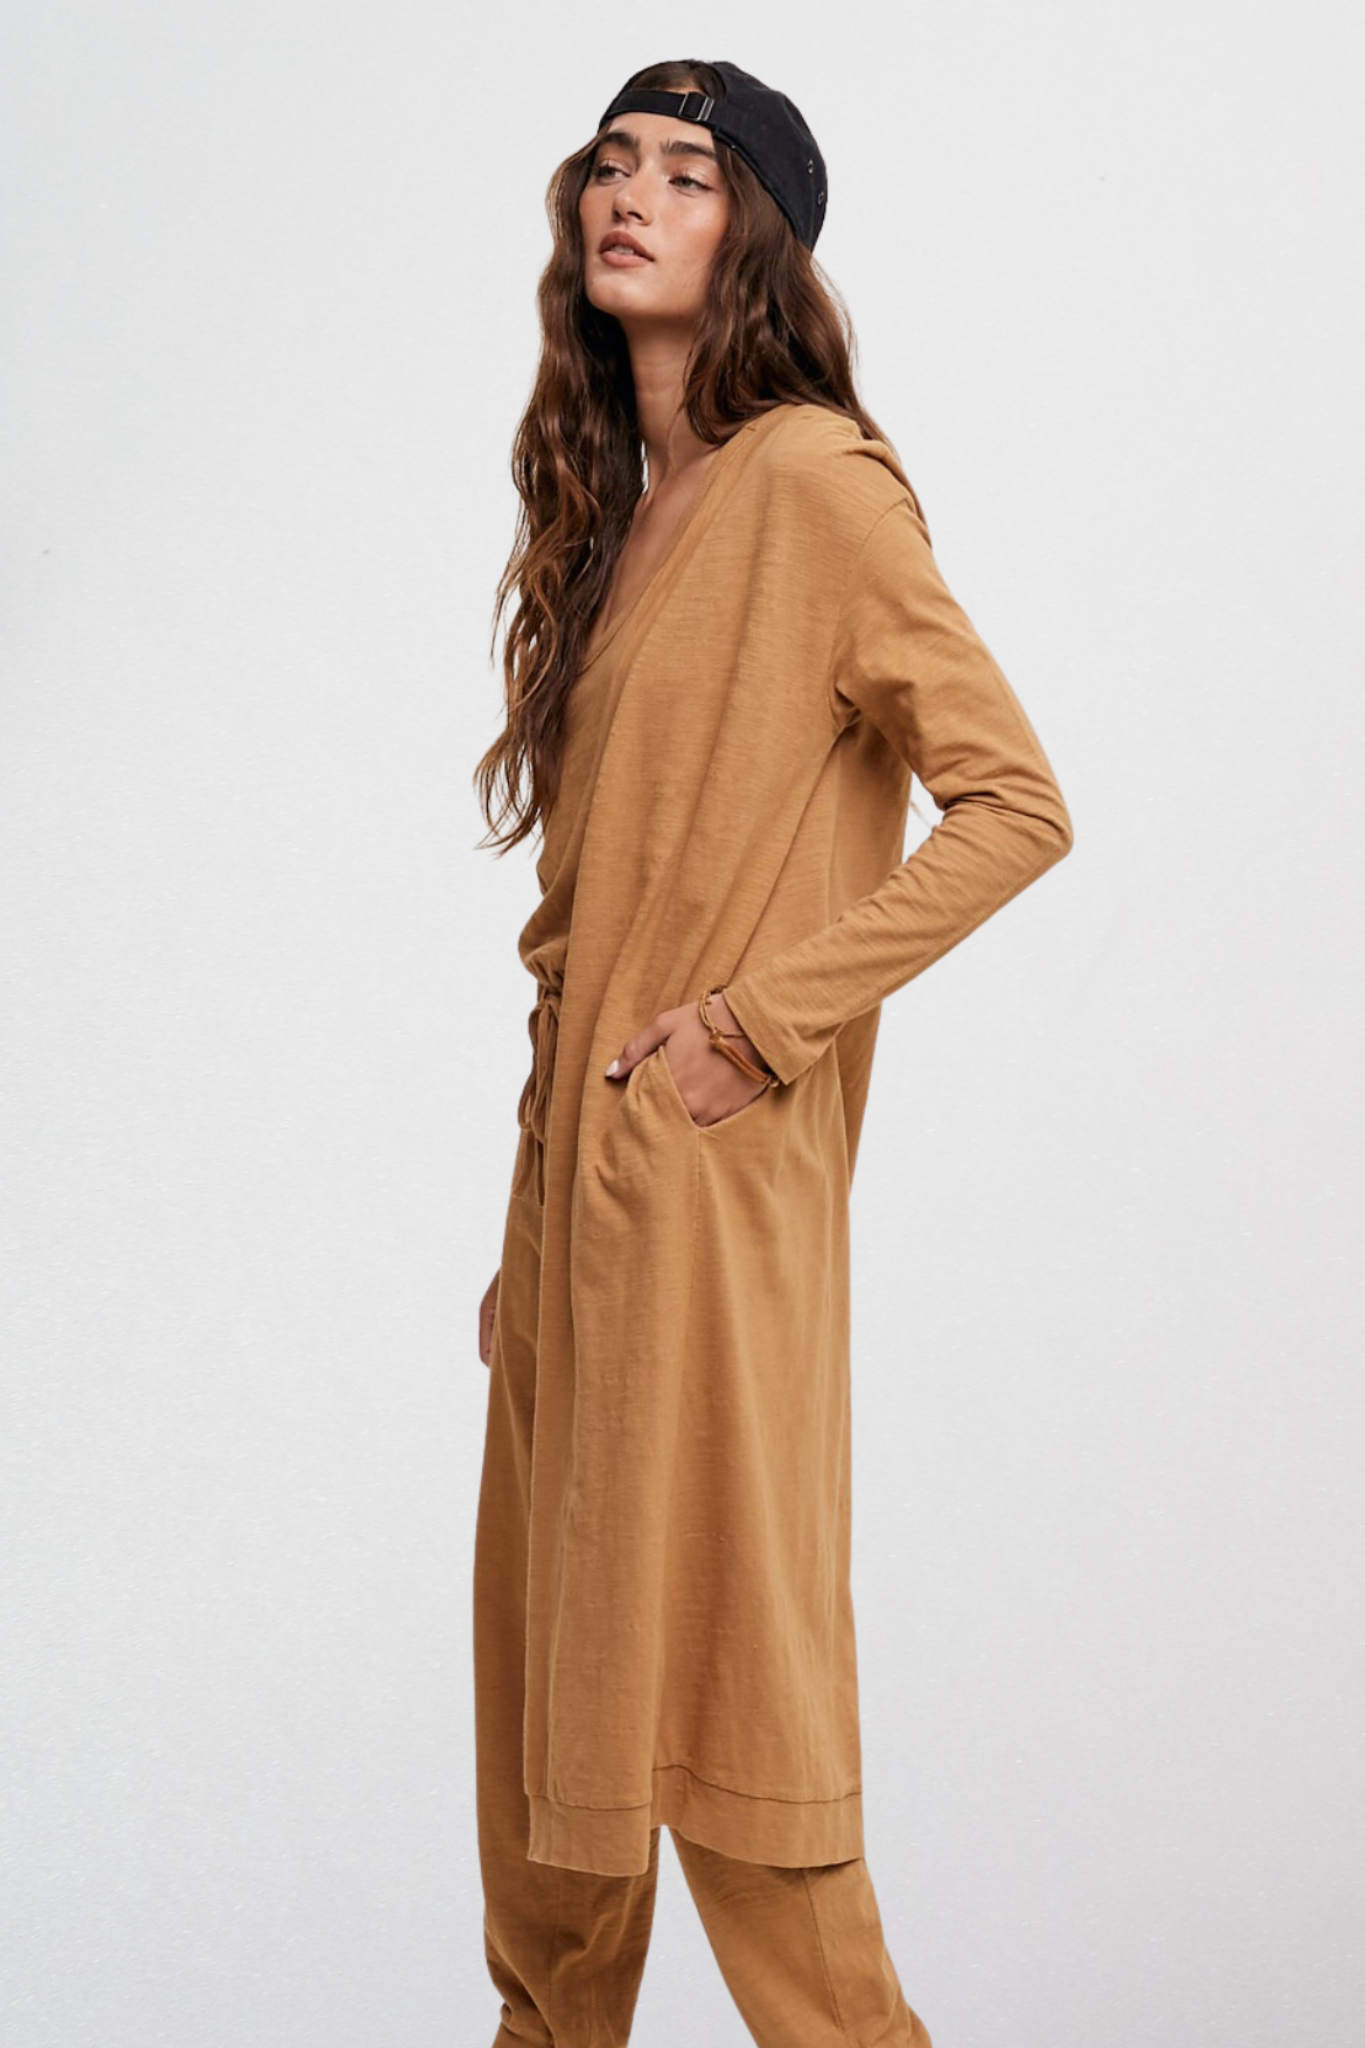 Jumpsuit and Cardigan Set in Toffee